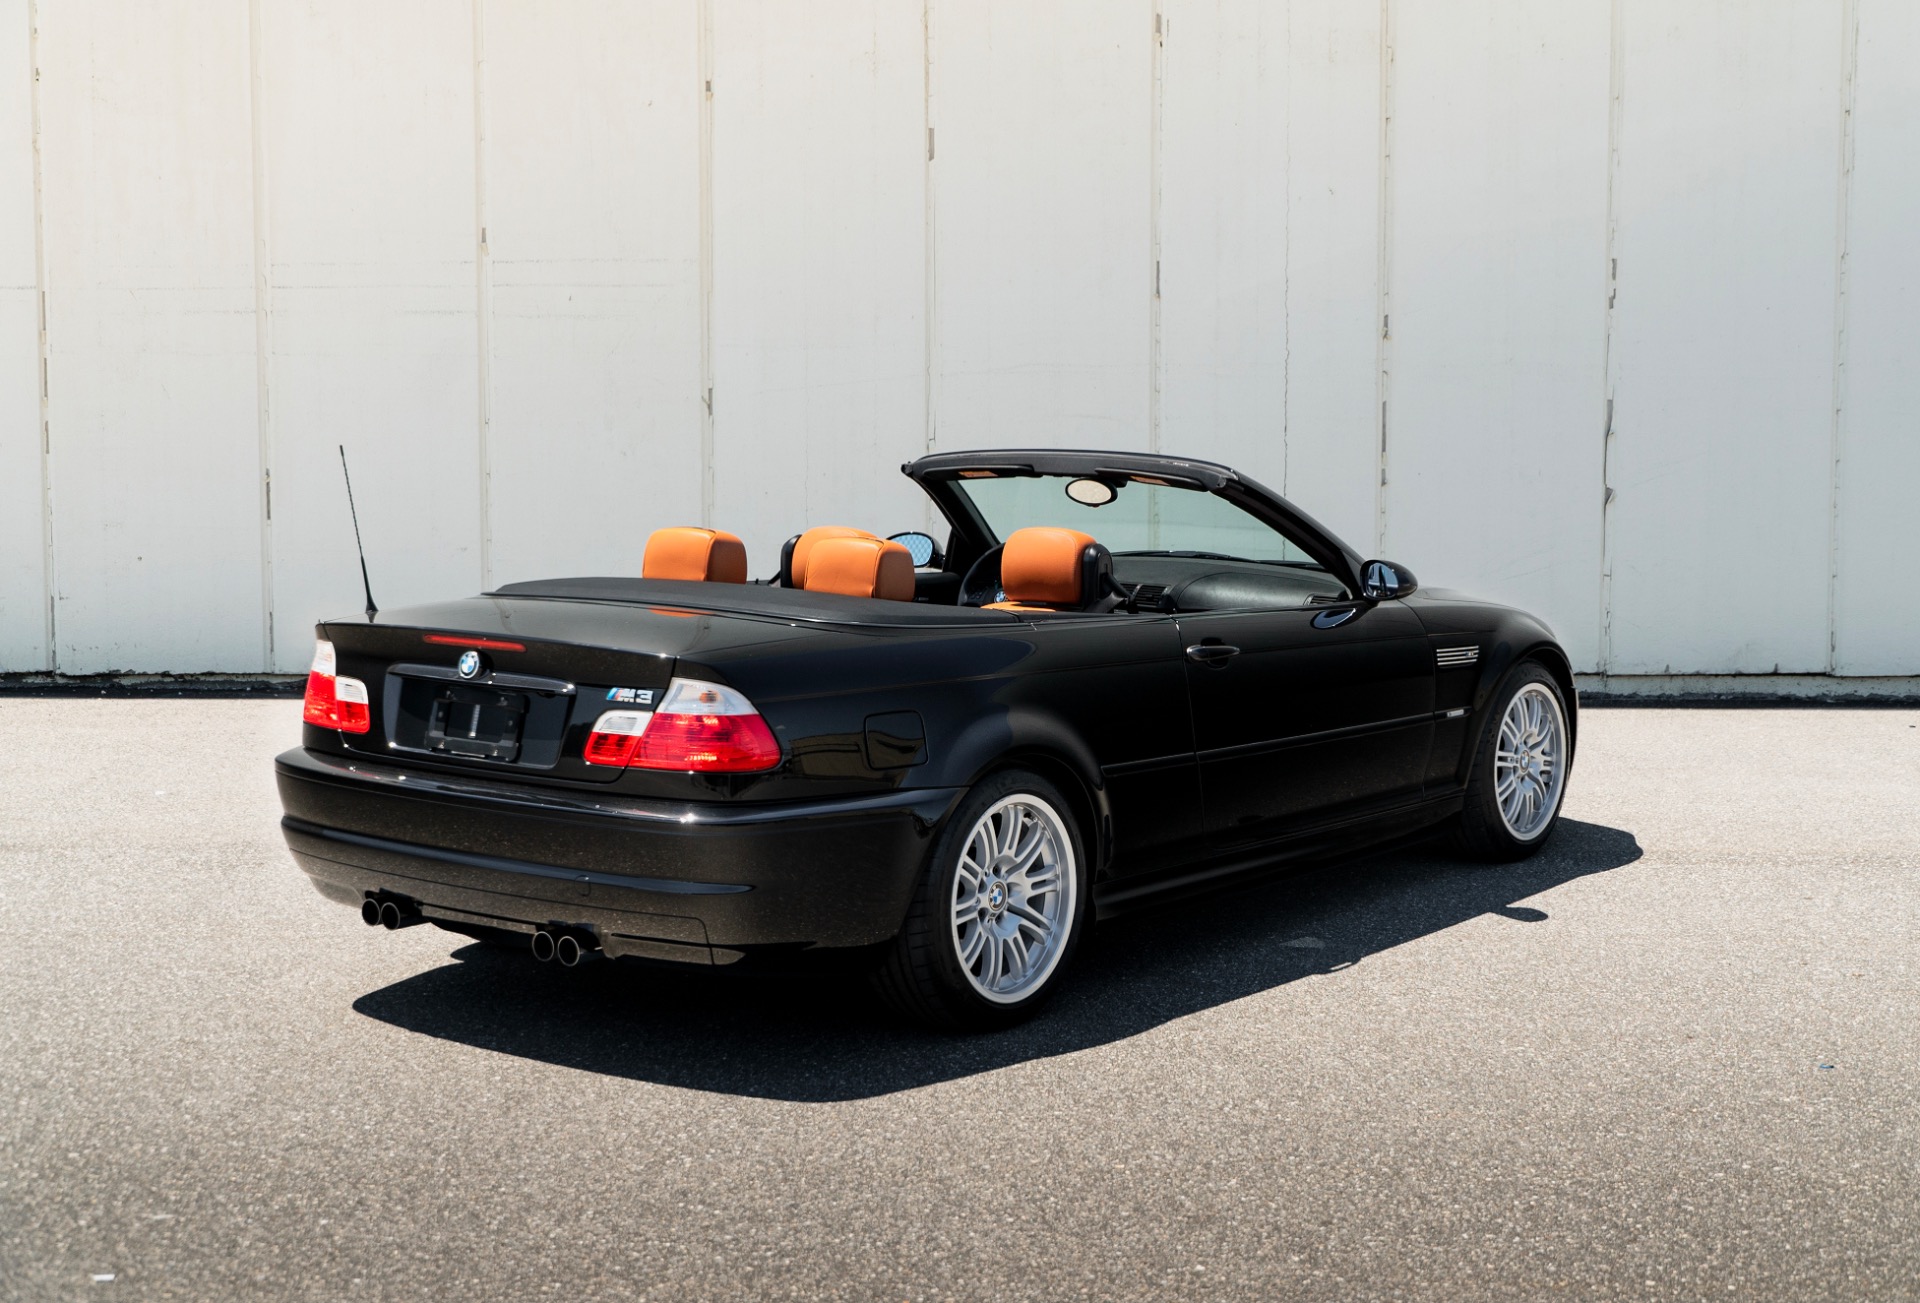 Used-2001-BMW-M3-Convertible-E46